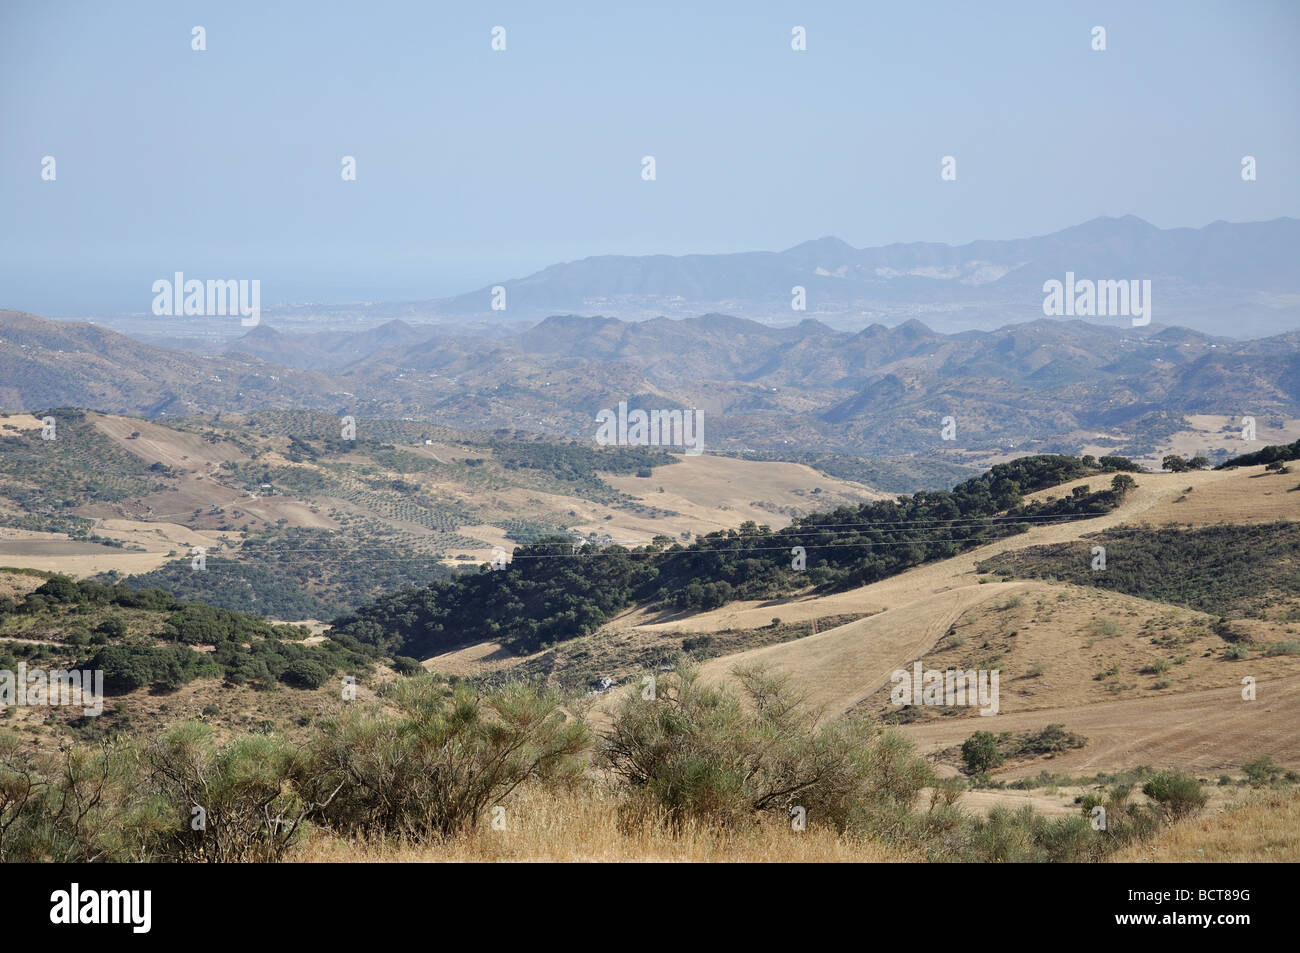 Landscape with olive groves, near Antequera, Malaga Province, Andalusia, Spain Stock Photo